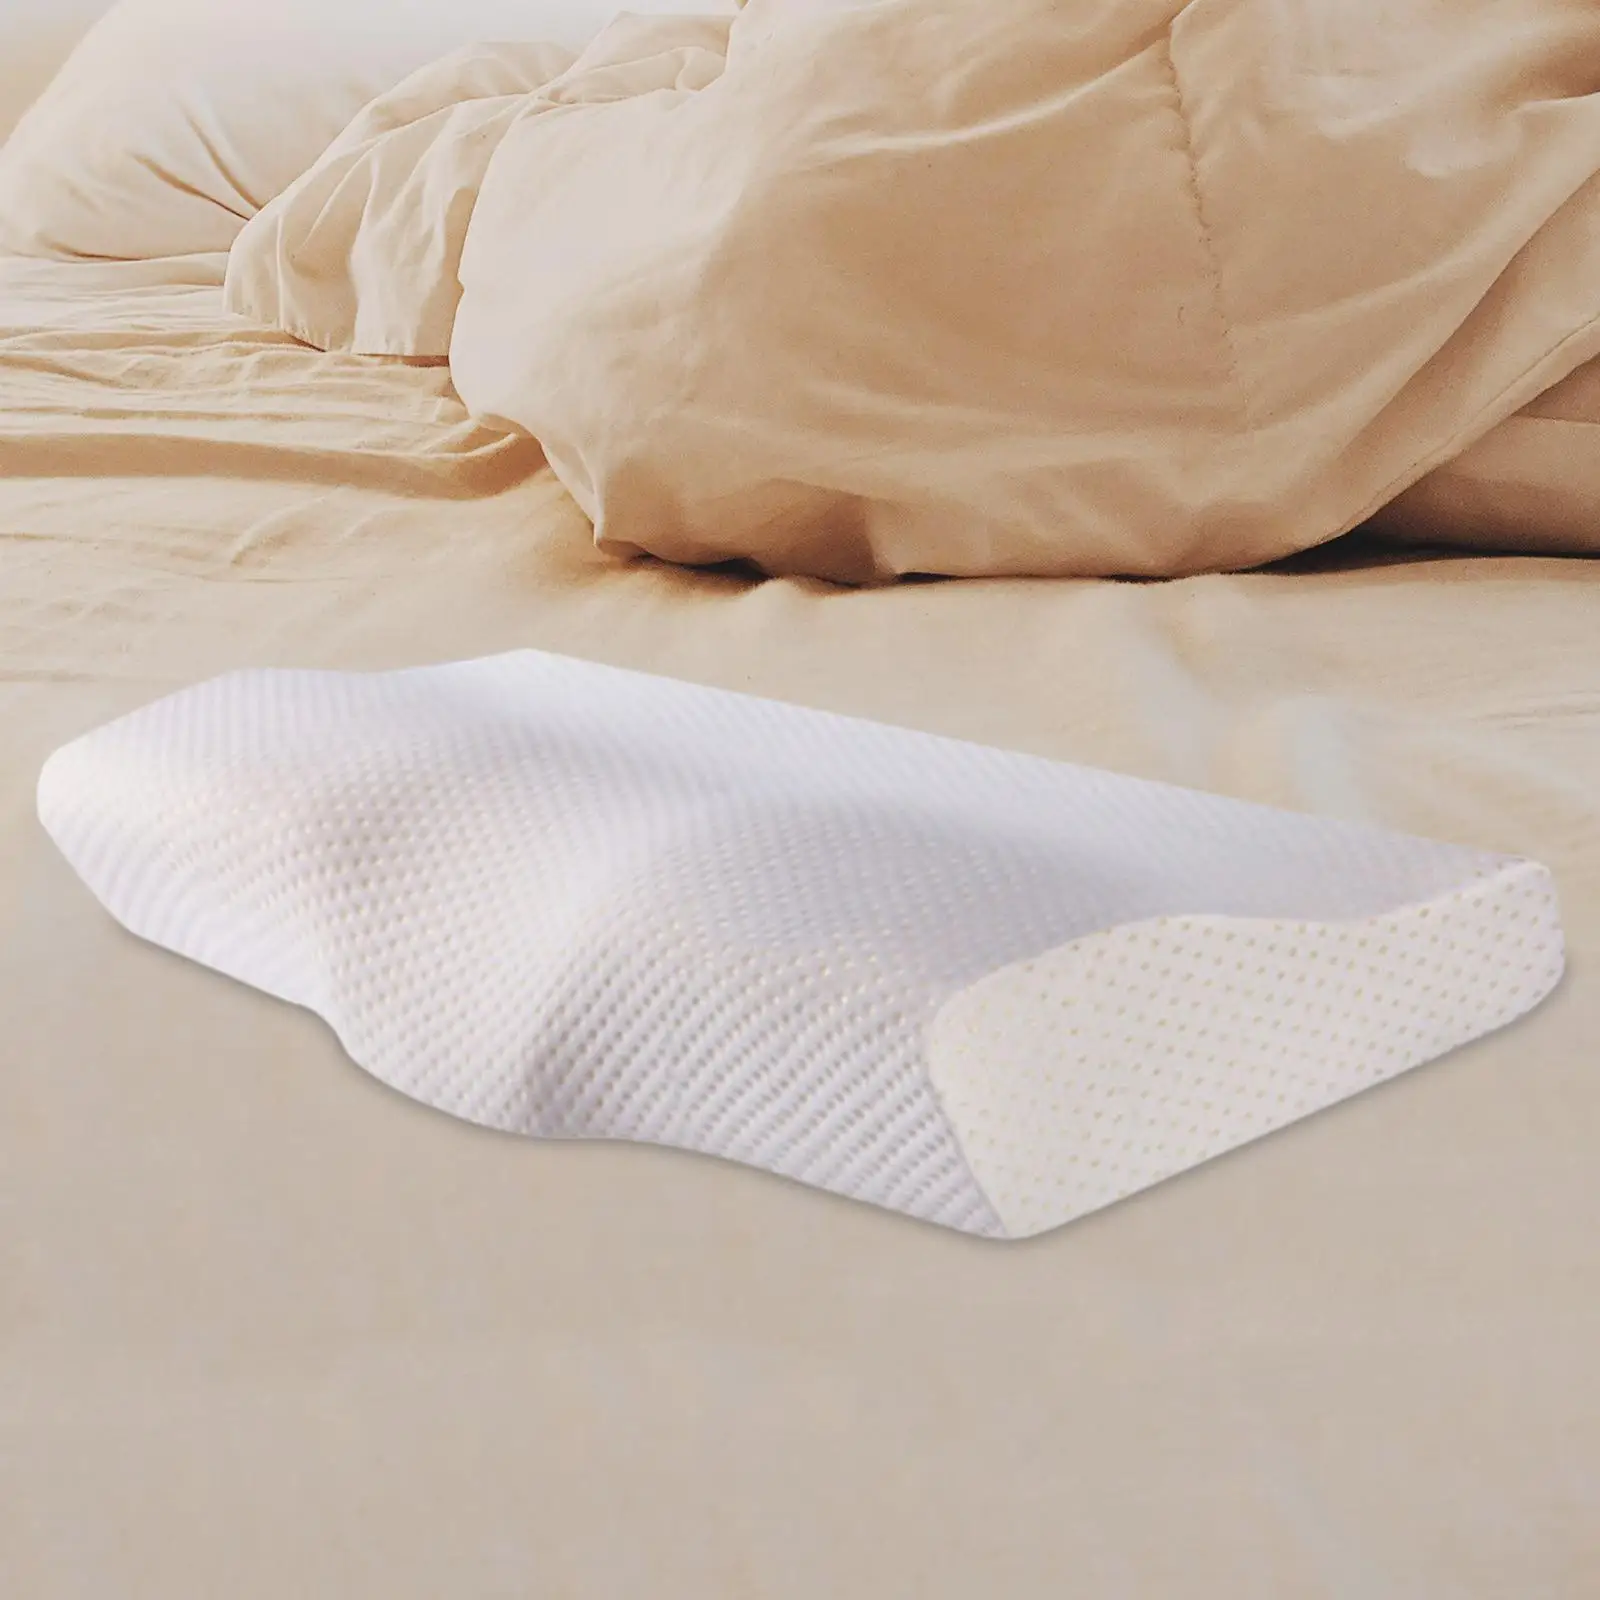 Ergonomic Memory Foam Pillow No Deforming for Side,Back and Stomach Sleepers